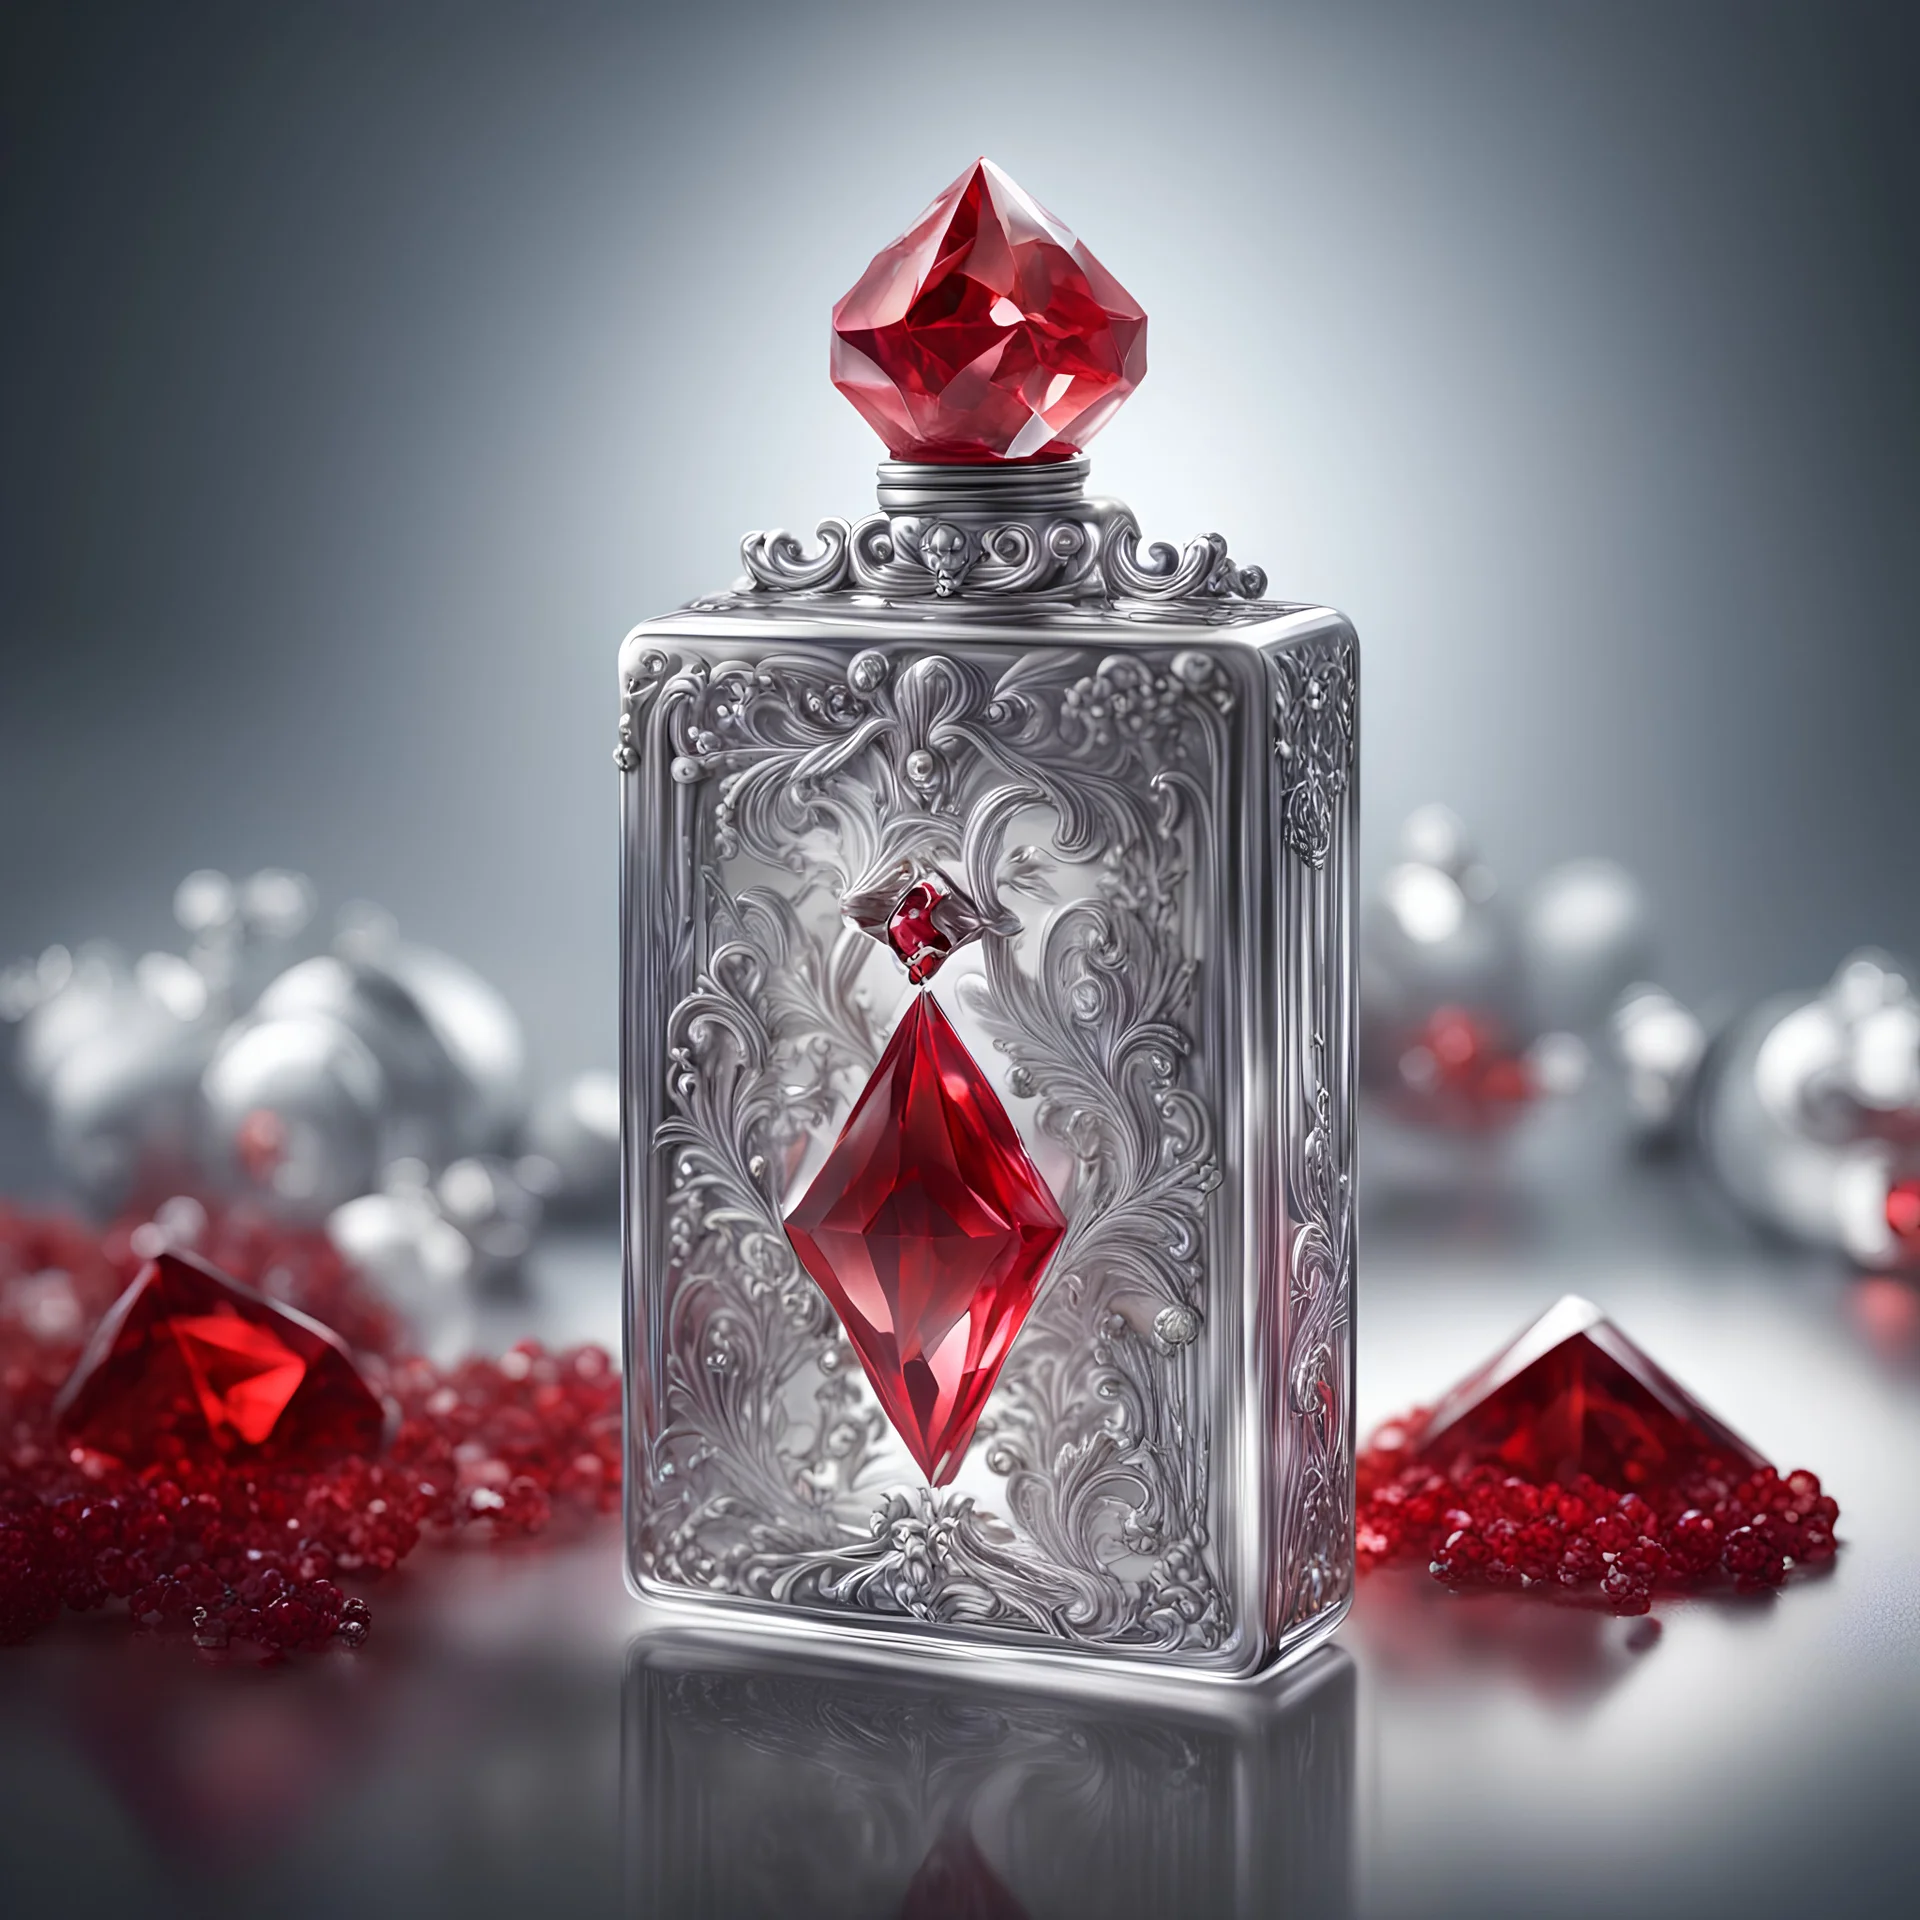 Silver rectangular perfume bottle with red crystal cap and small silver decorations. Illustrative art, art interpretation, concept art, cgsociety contest winner, seasonal art, seasonal art HD, 4k, 8k, intricate, detailed, intricately detailed, luminous, translucent fantasy crystal, holographic data, soft body, shadow play, light, fog, atmospheric, cinematic, light film, hyper-detailed, hyper-realistic, masterpiece, atmospheric, high resolution, 8k, HDR, 500px, mysterious and artistic digital art